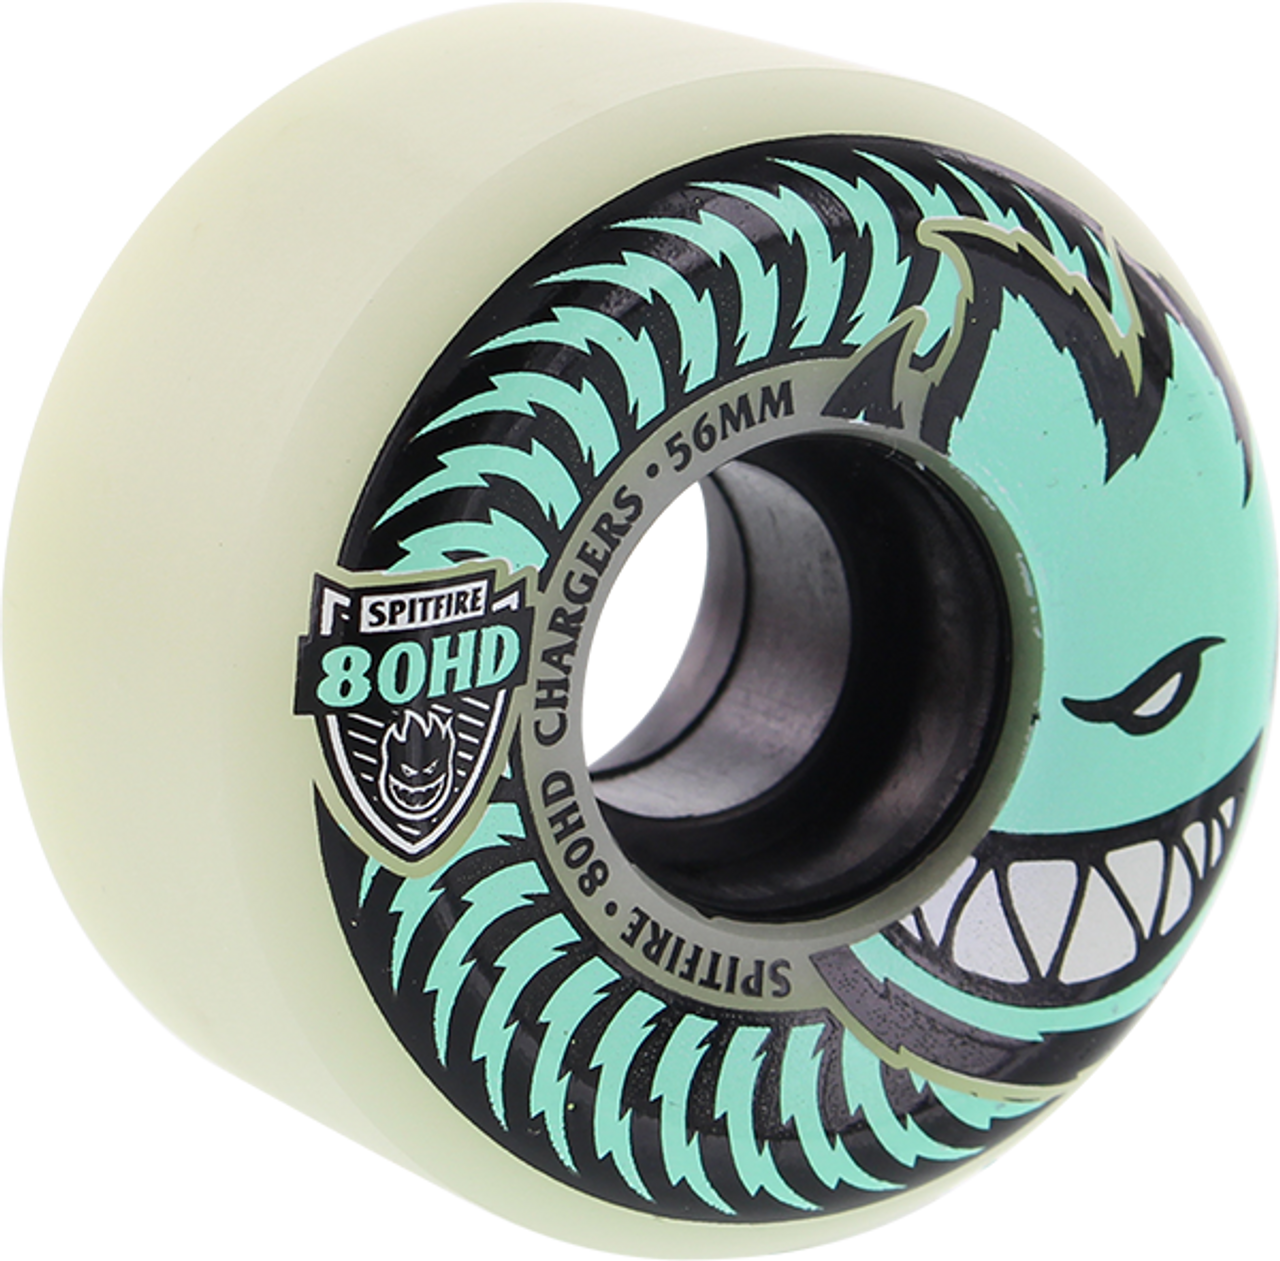 SPITFIRE 80HD CHARGER CONICAL 56mm STAY LIT GLOW GREEN WHEELS SET